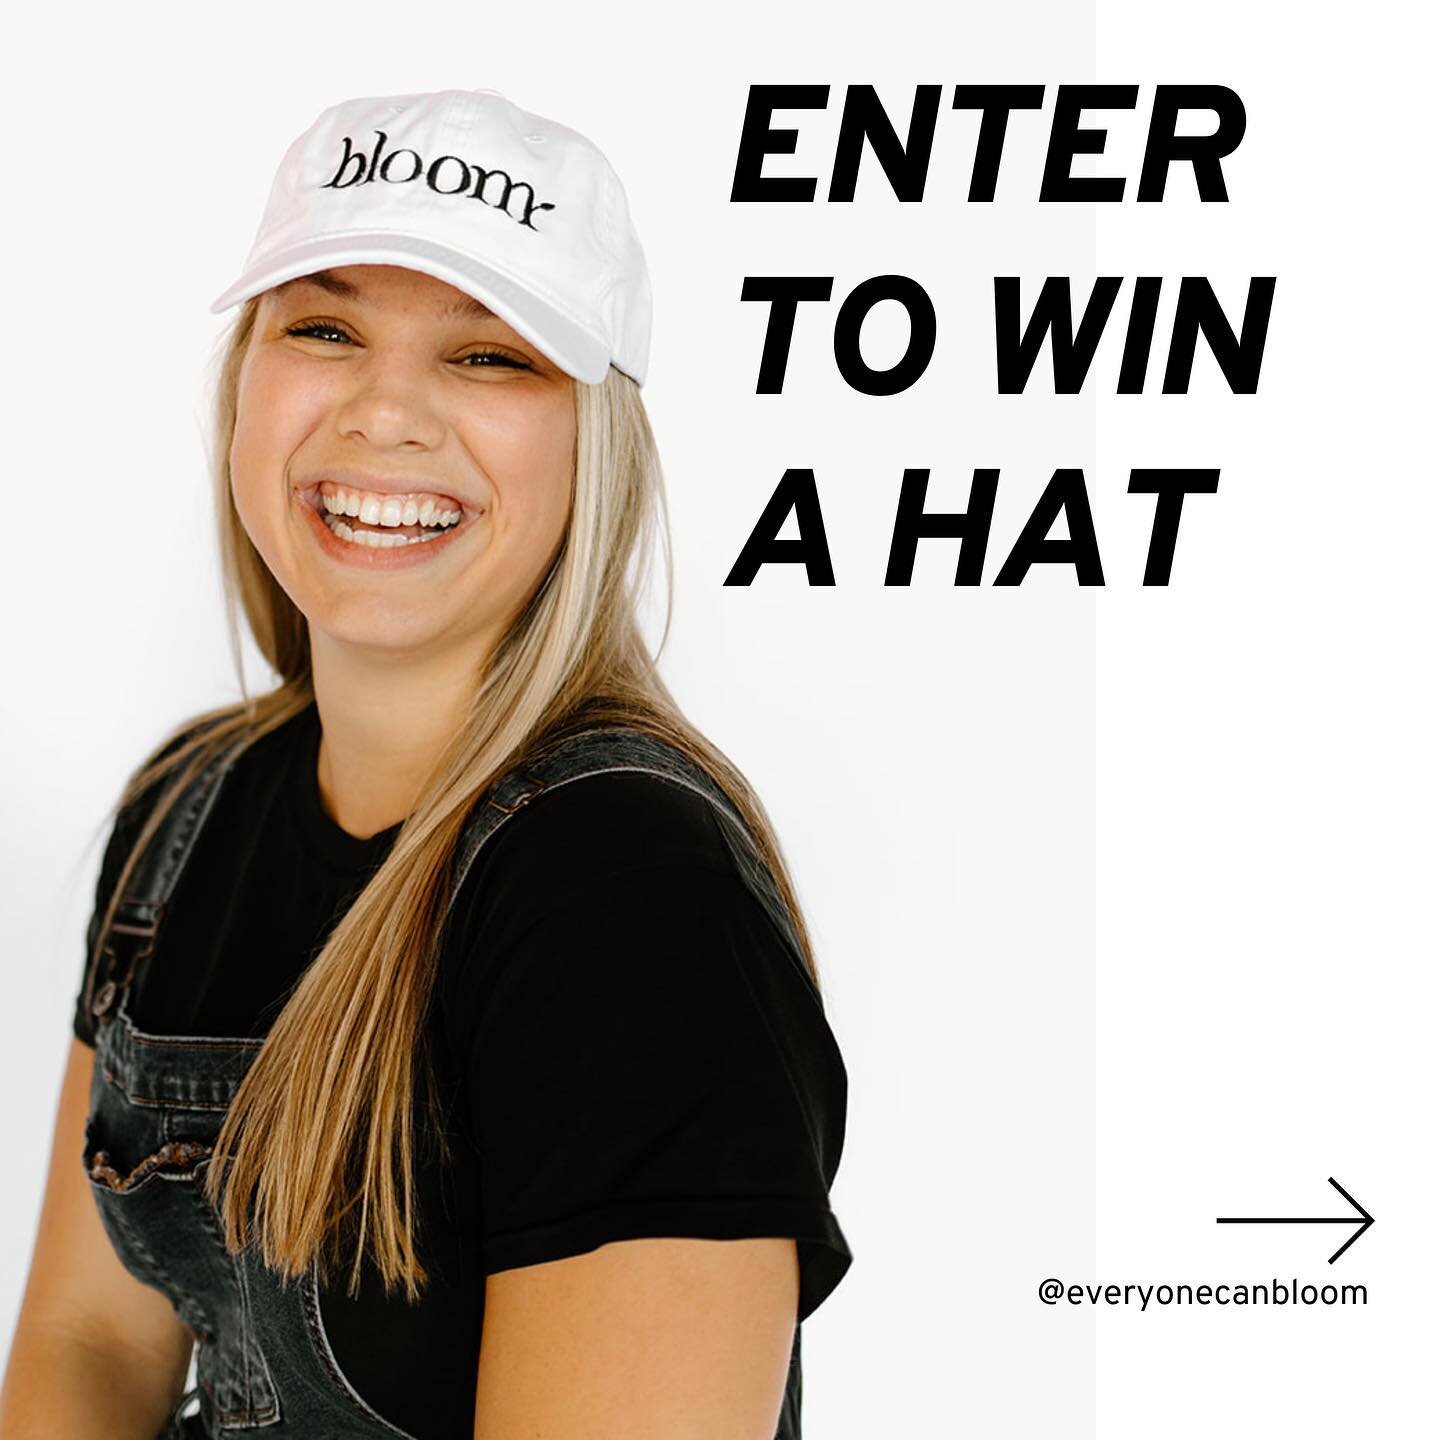 This could be you 🤩🧢

Tune in to Bloom&rsquo;s Virtual Launch Party via Instagram Live TOMORROW at 6:00 PM.

Use the link in Bloom&rsquo;s bio to RSVP/submit a question for the live Q&amp;A. Submitting a question enters you for a chance to win a $1